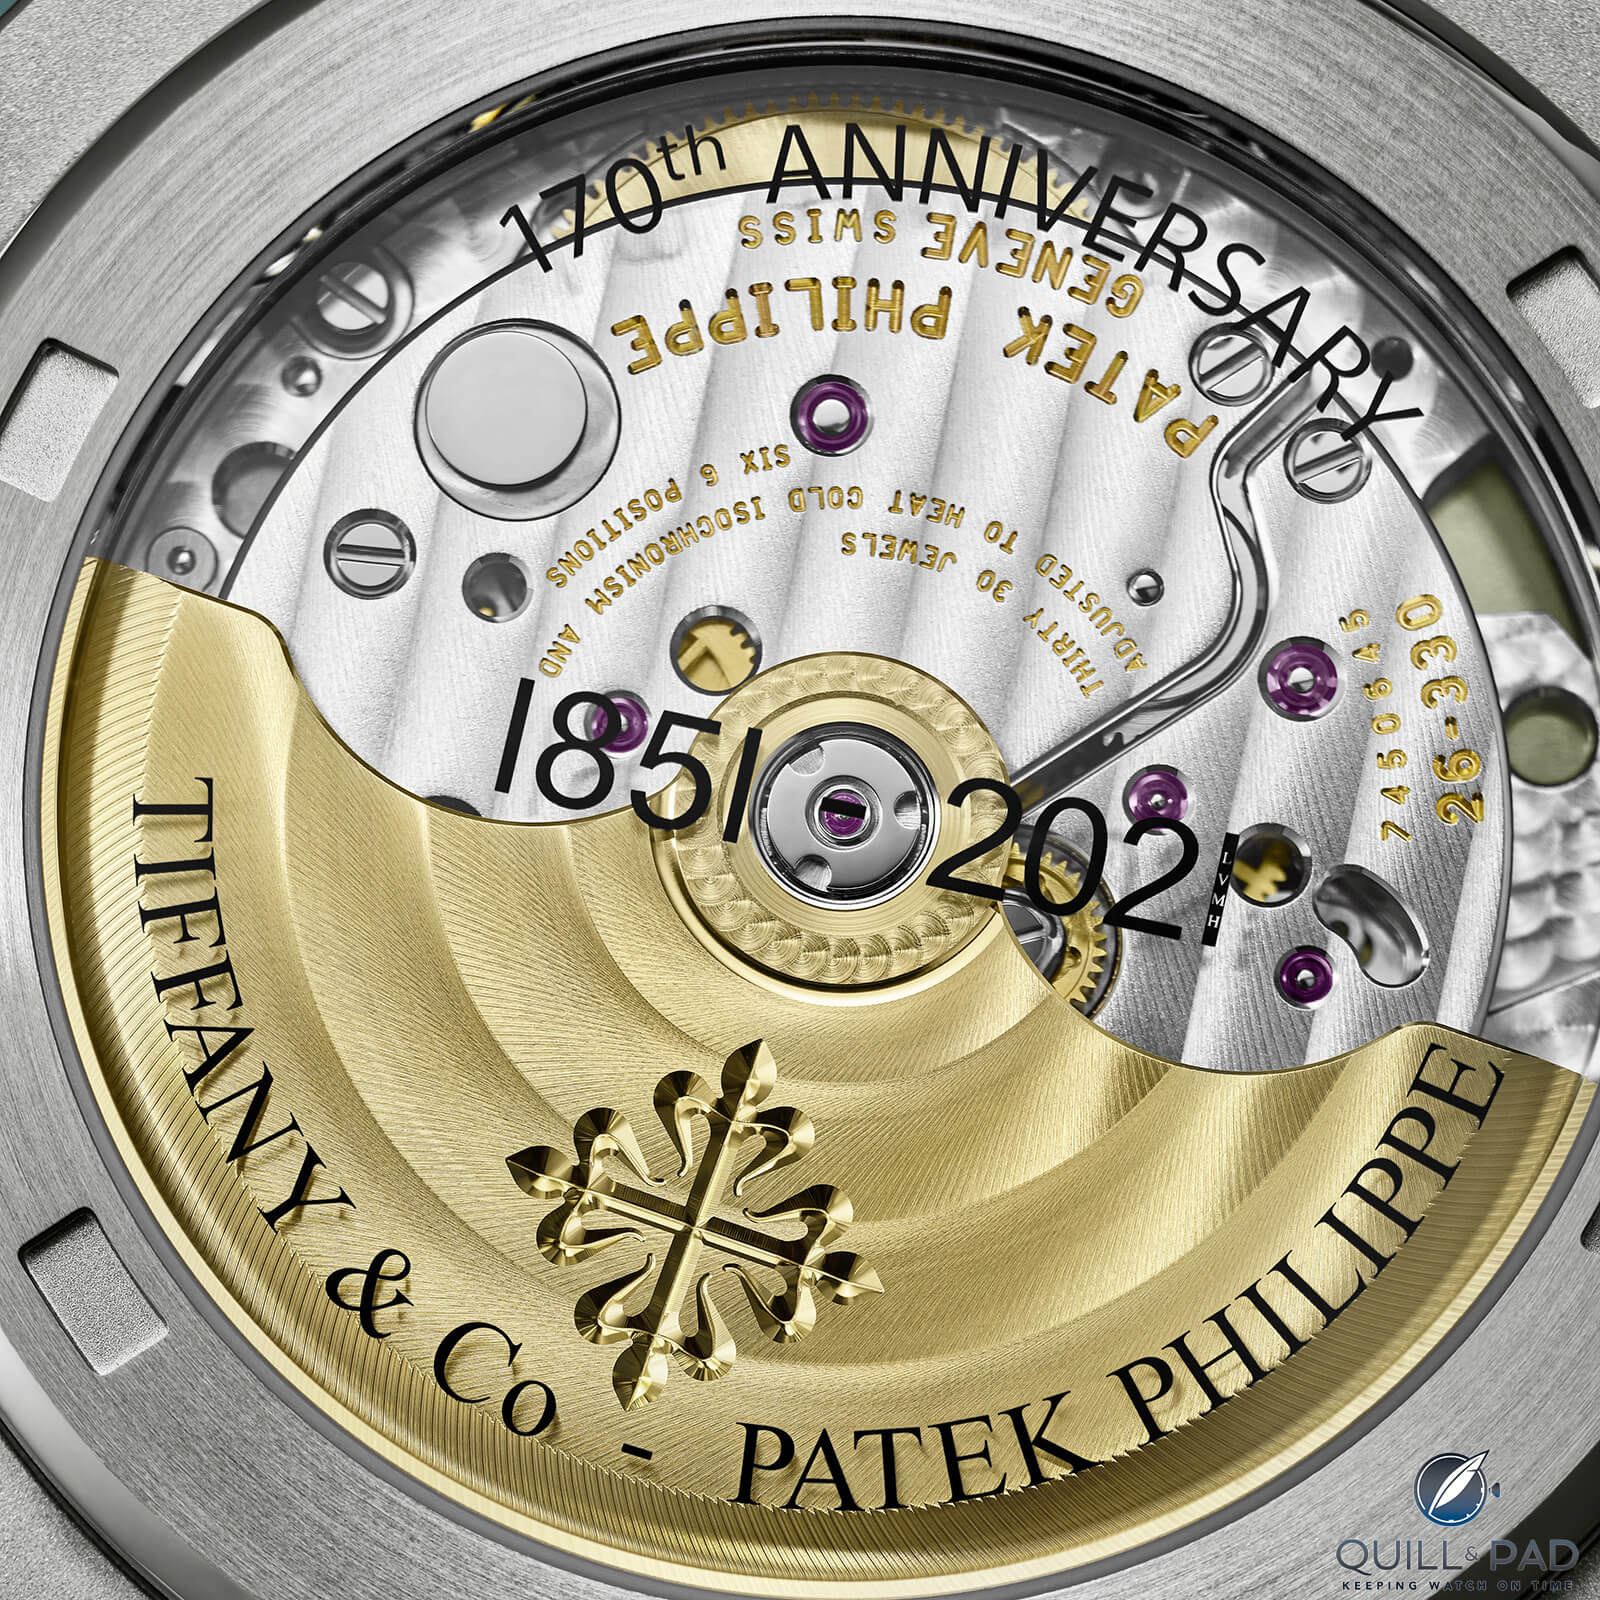 Patek Philippe Tiffany and Co. Nautilus Sells at Record Breaking Auction  Price — Wrist Enthusiast